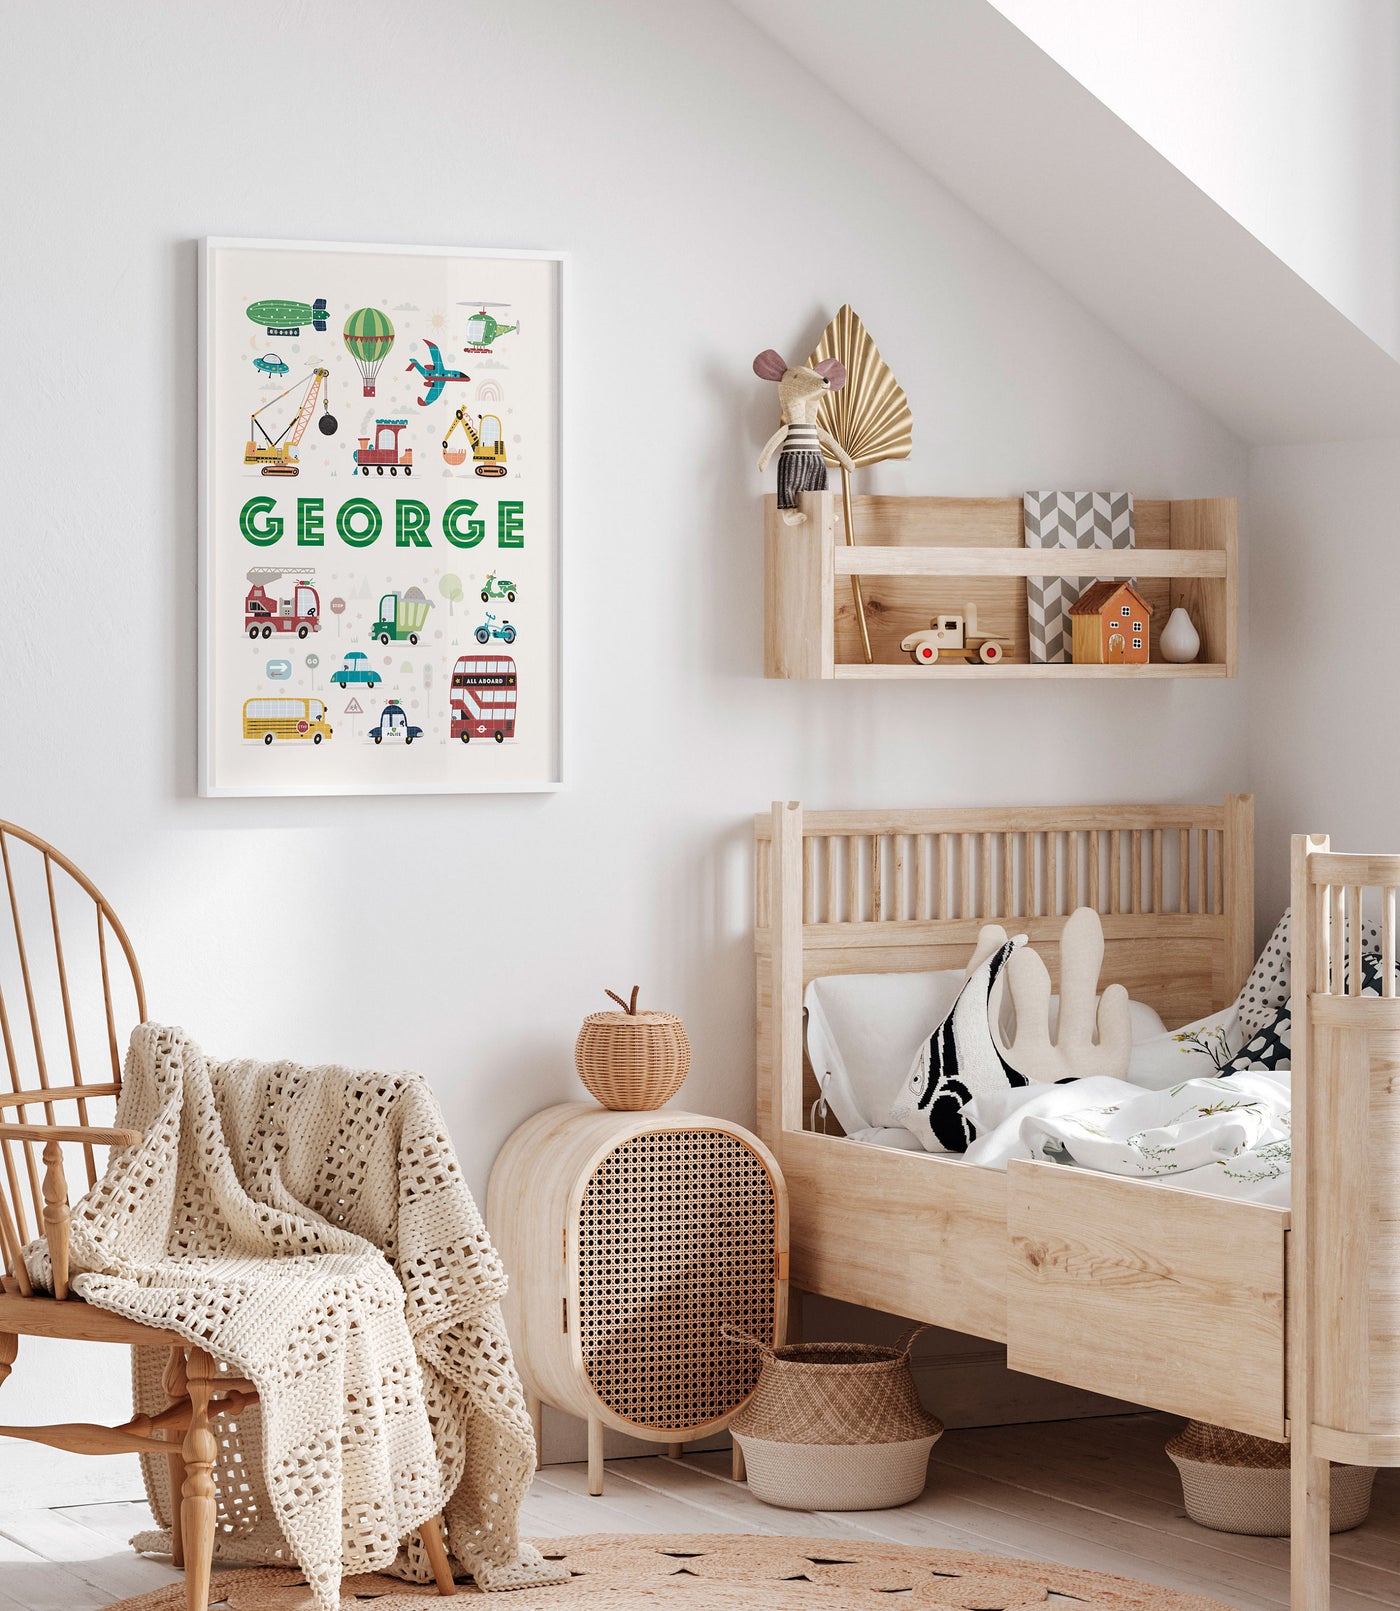 Elegant wall art featuring a personalized transport-themed name print &#39;george&#39; in a green colour palette with playful vehicle illustrations, framed and ready for nursery decor.